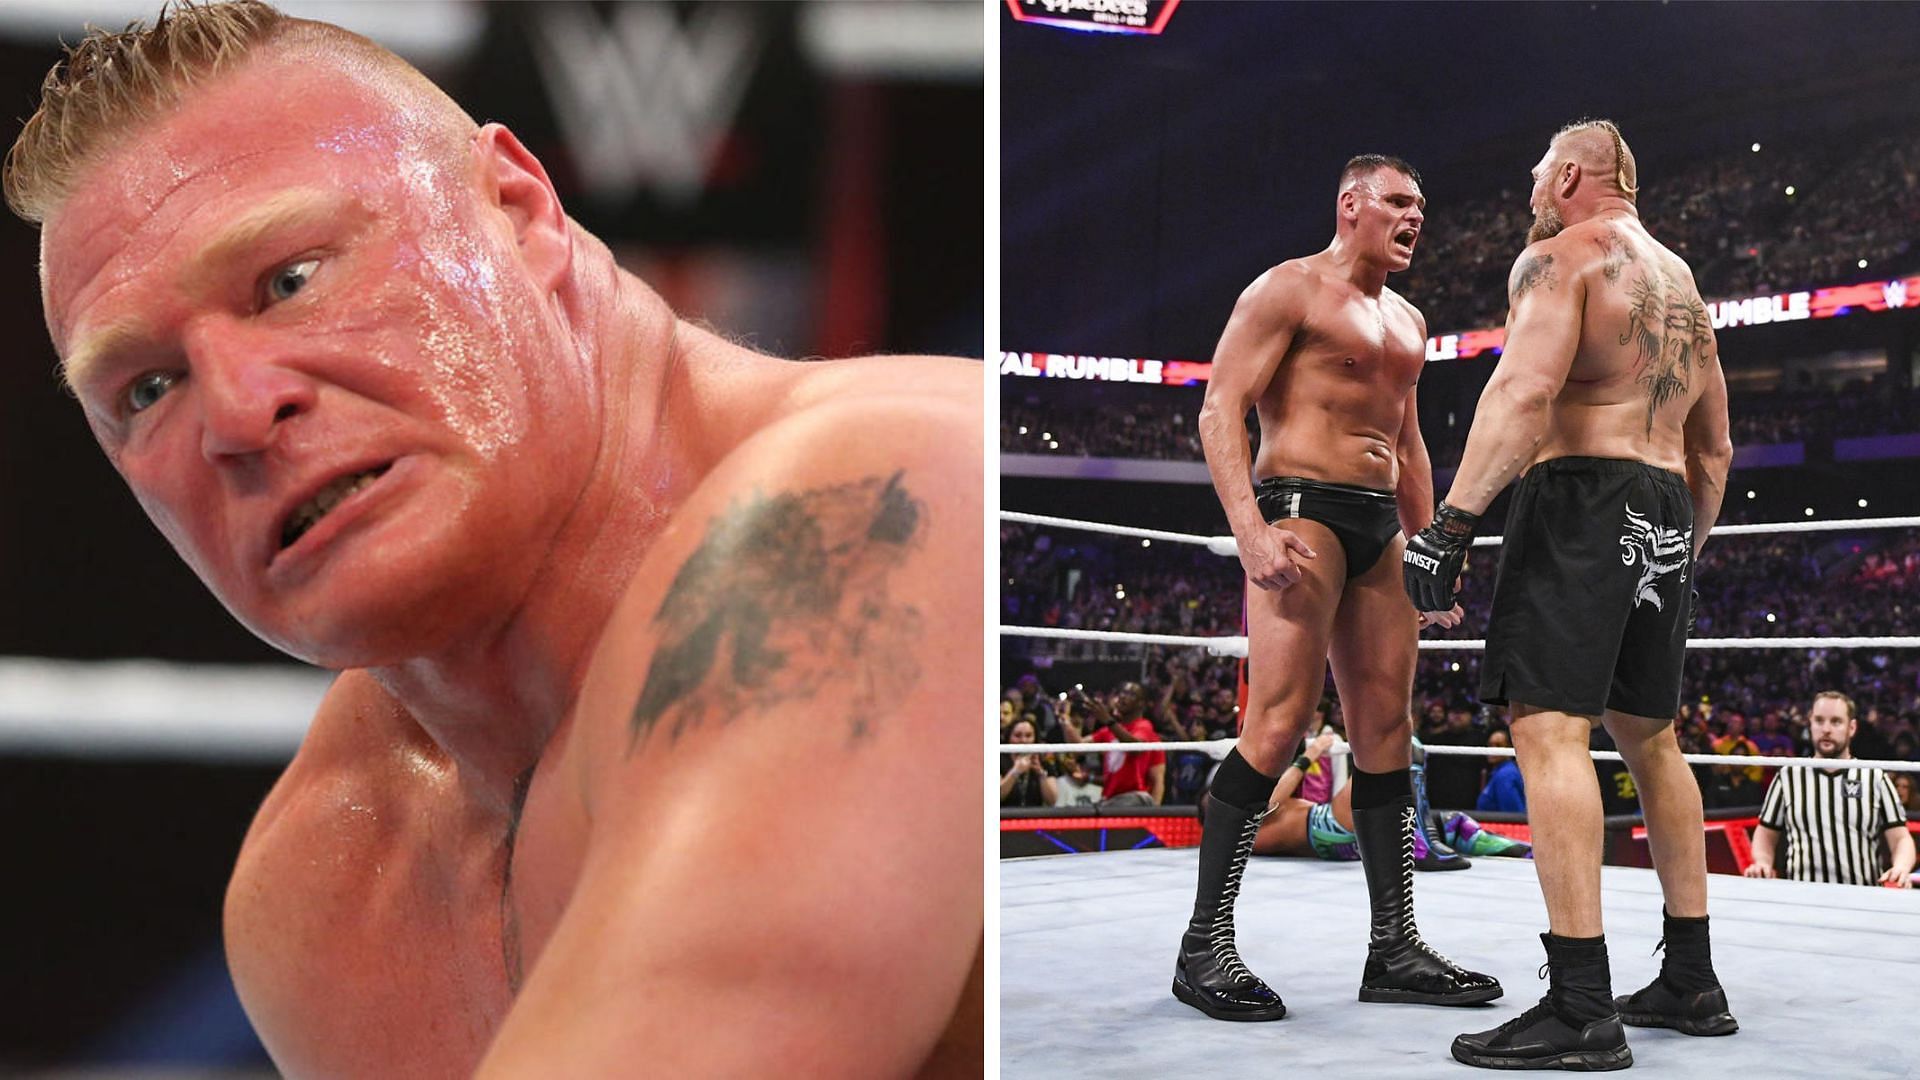 Gunther vs. Brock Lesnar may have been one of the matches for WrestleMania 40